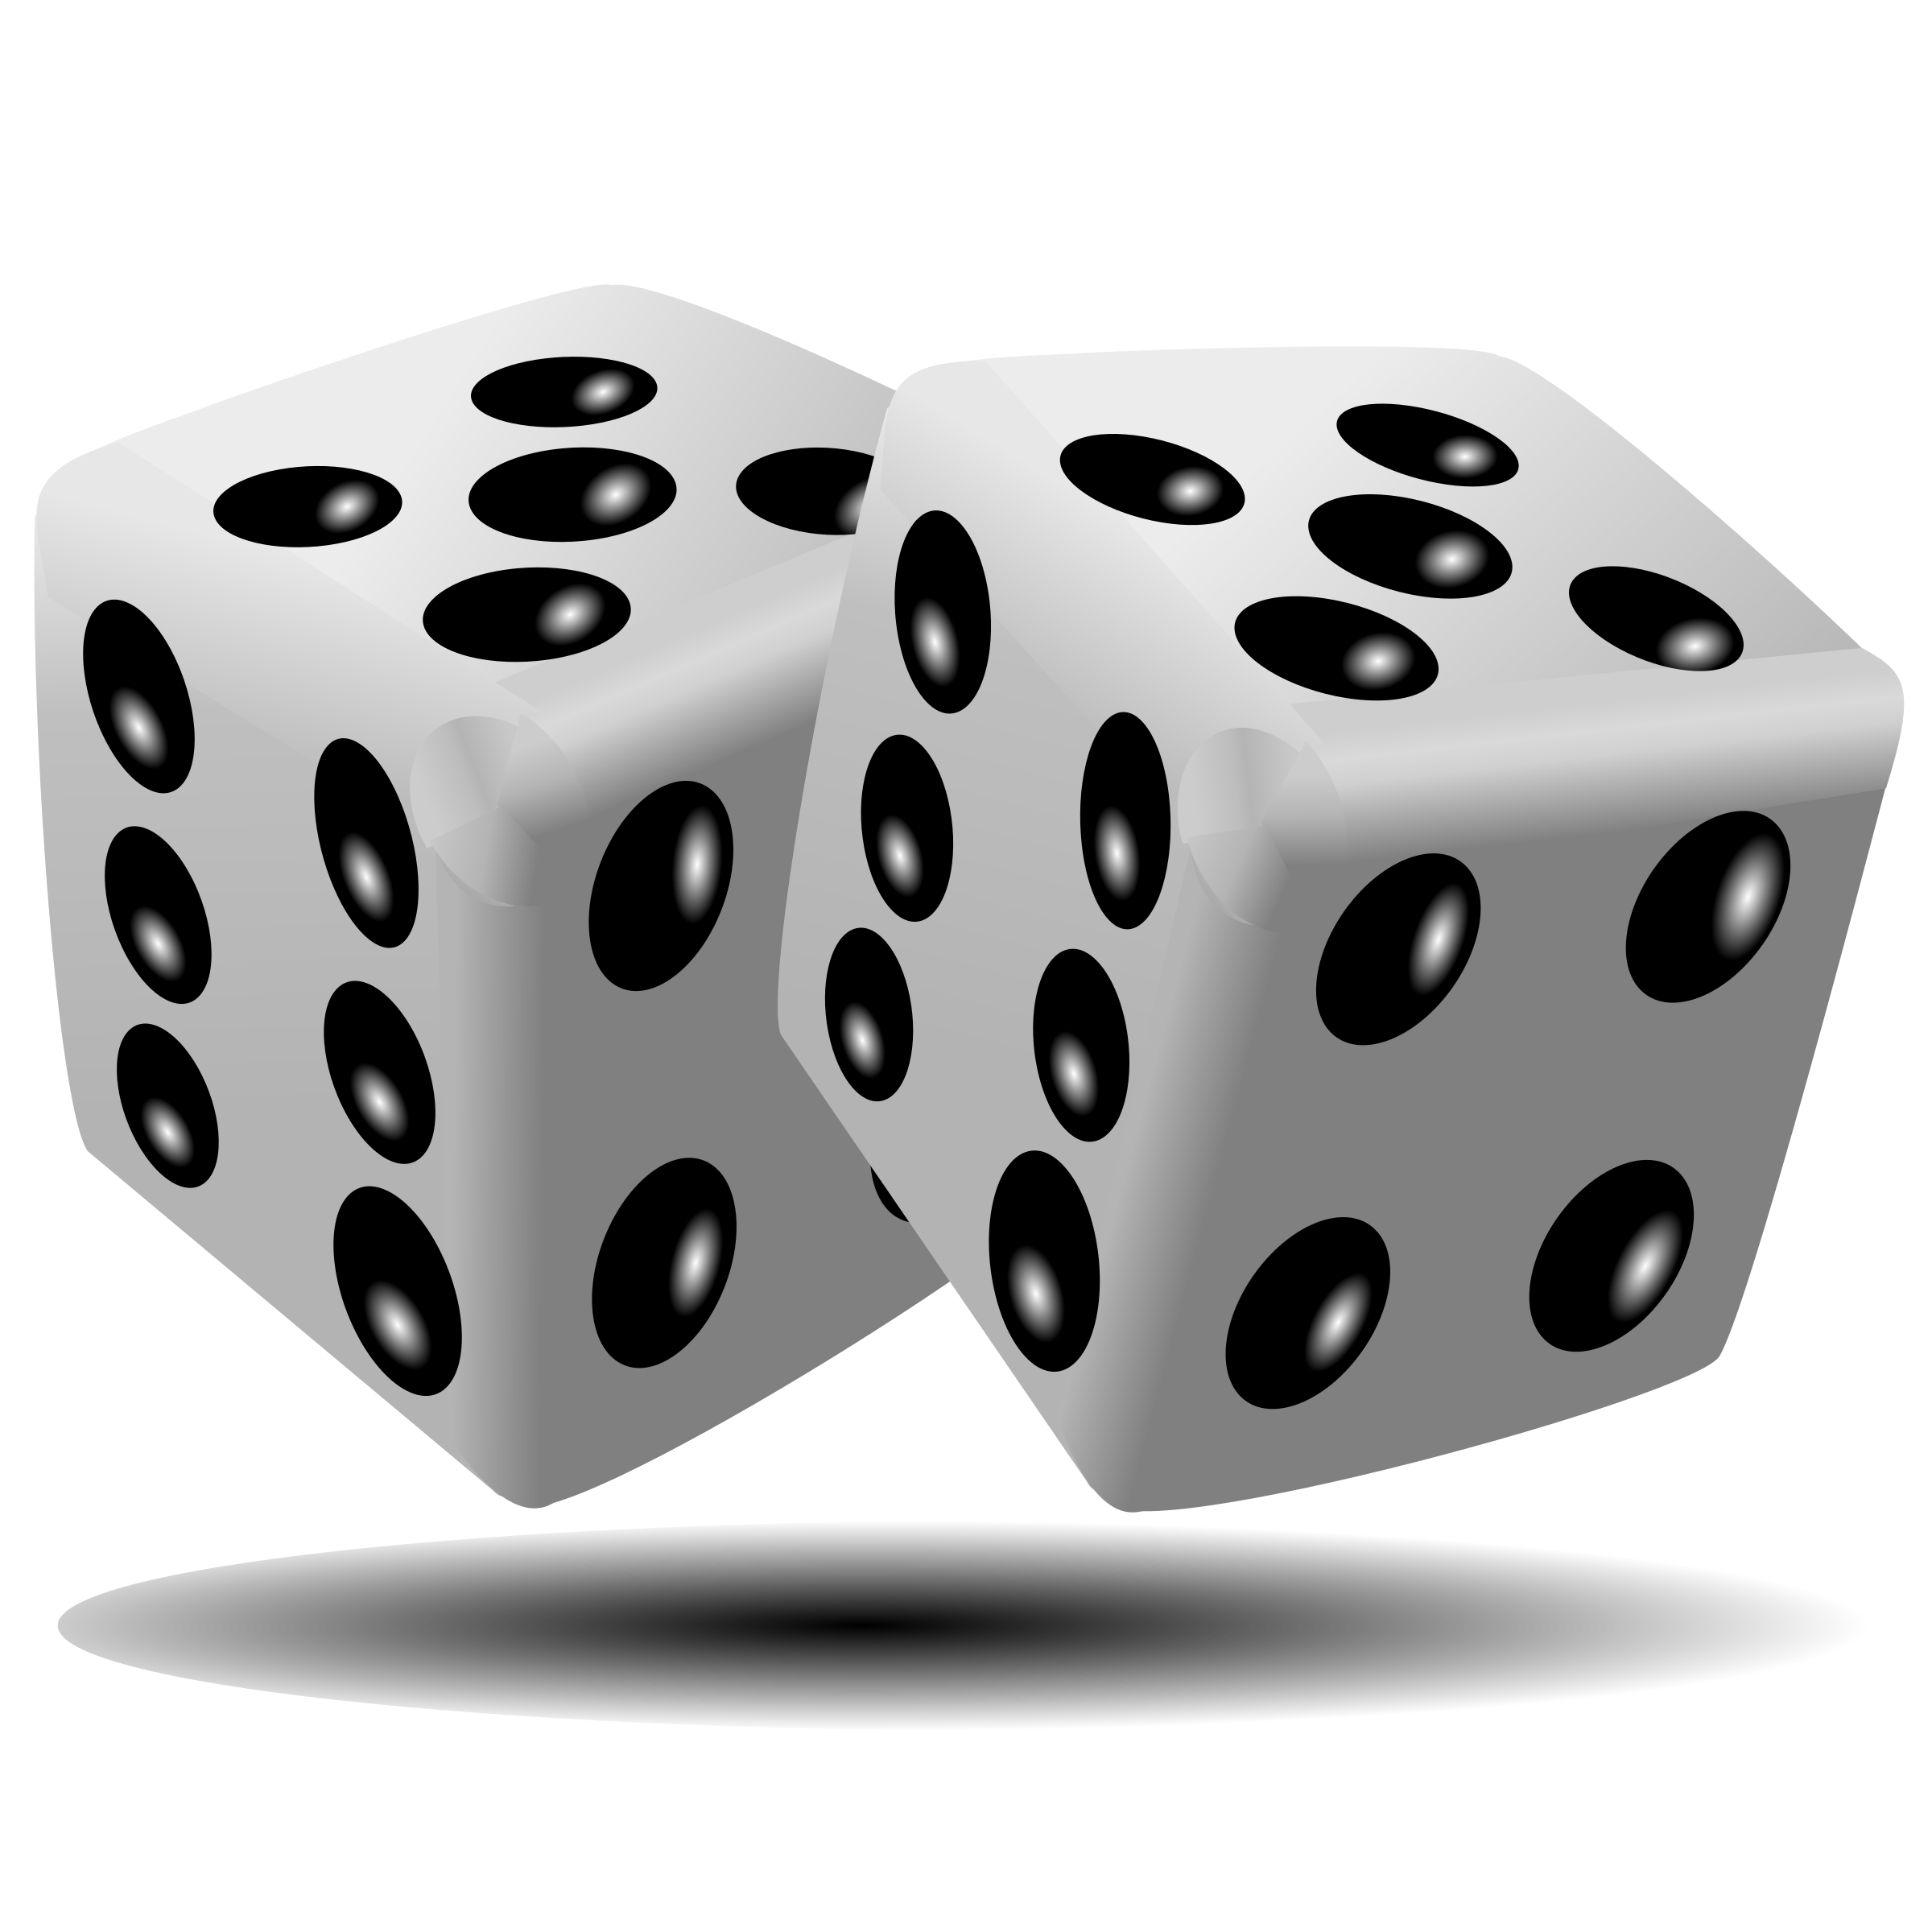 Black And White Dice PNG - 153503